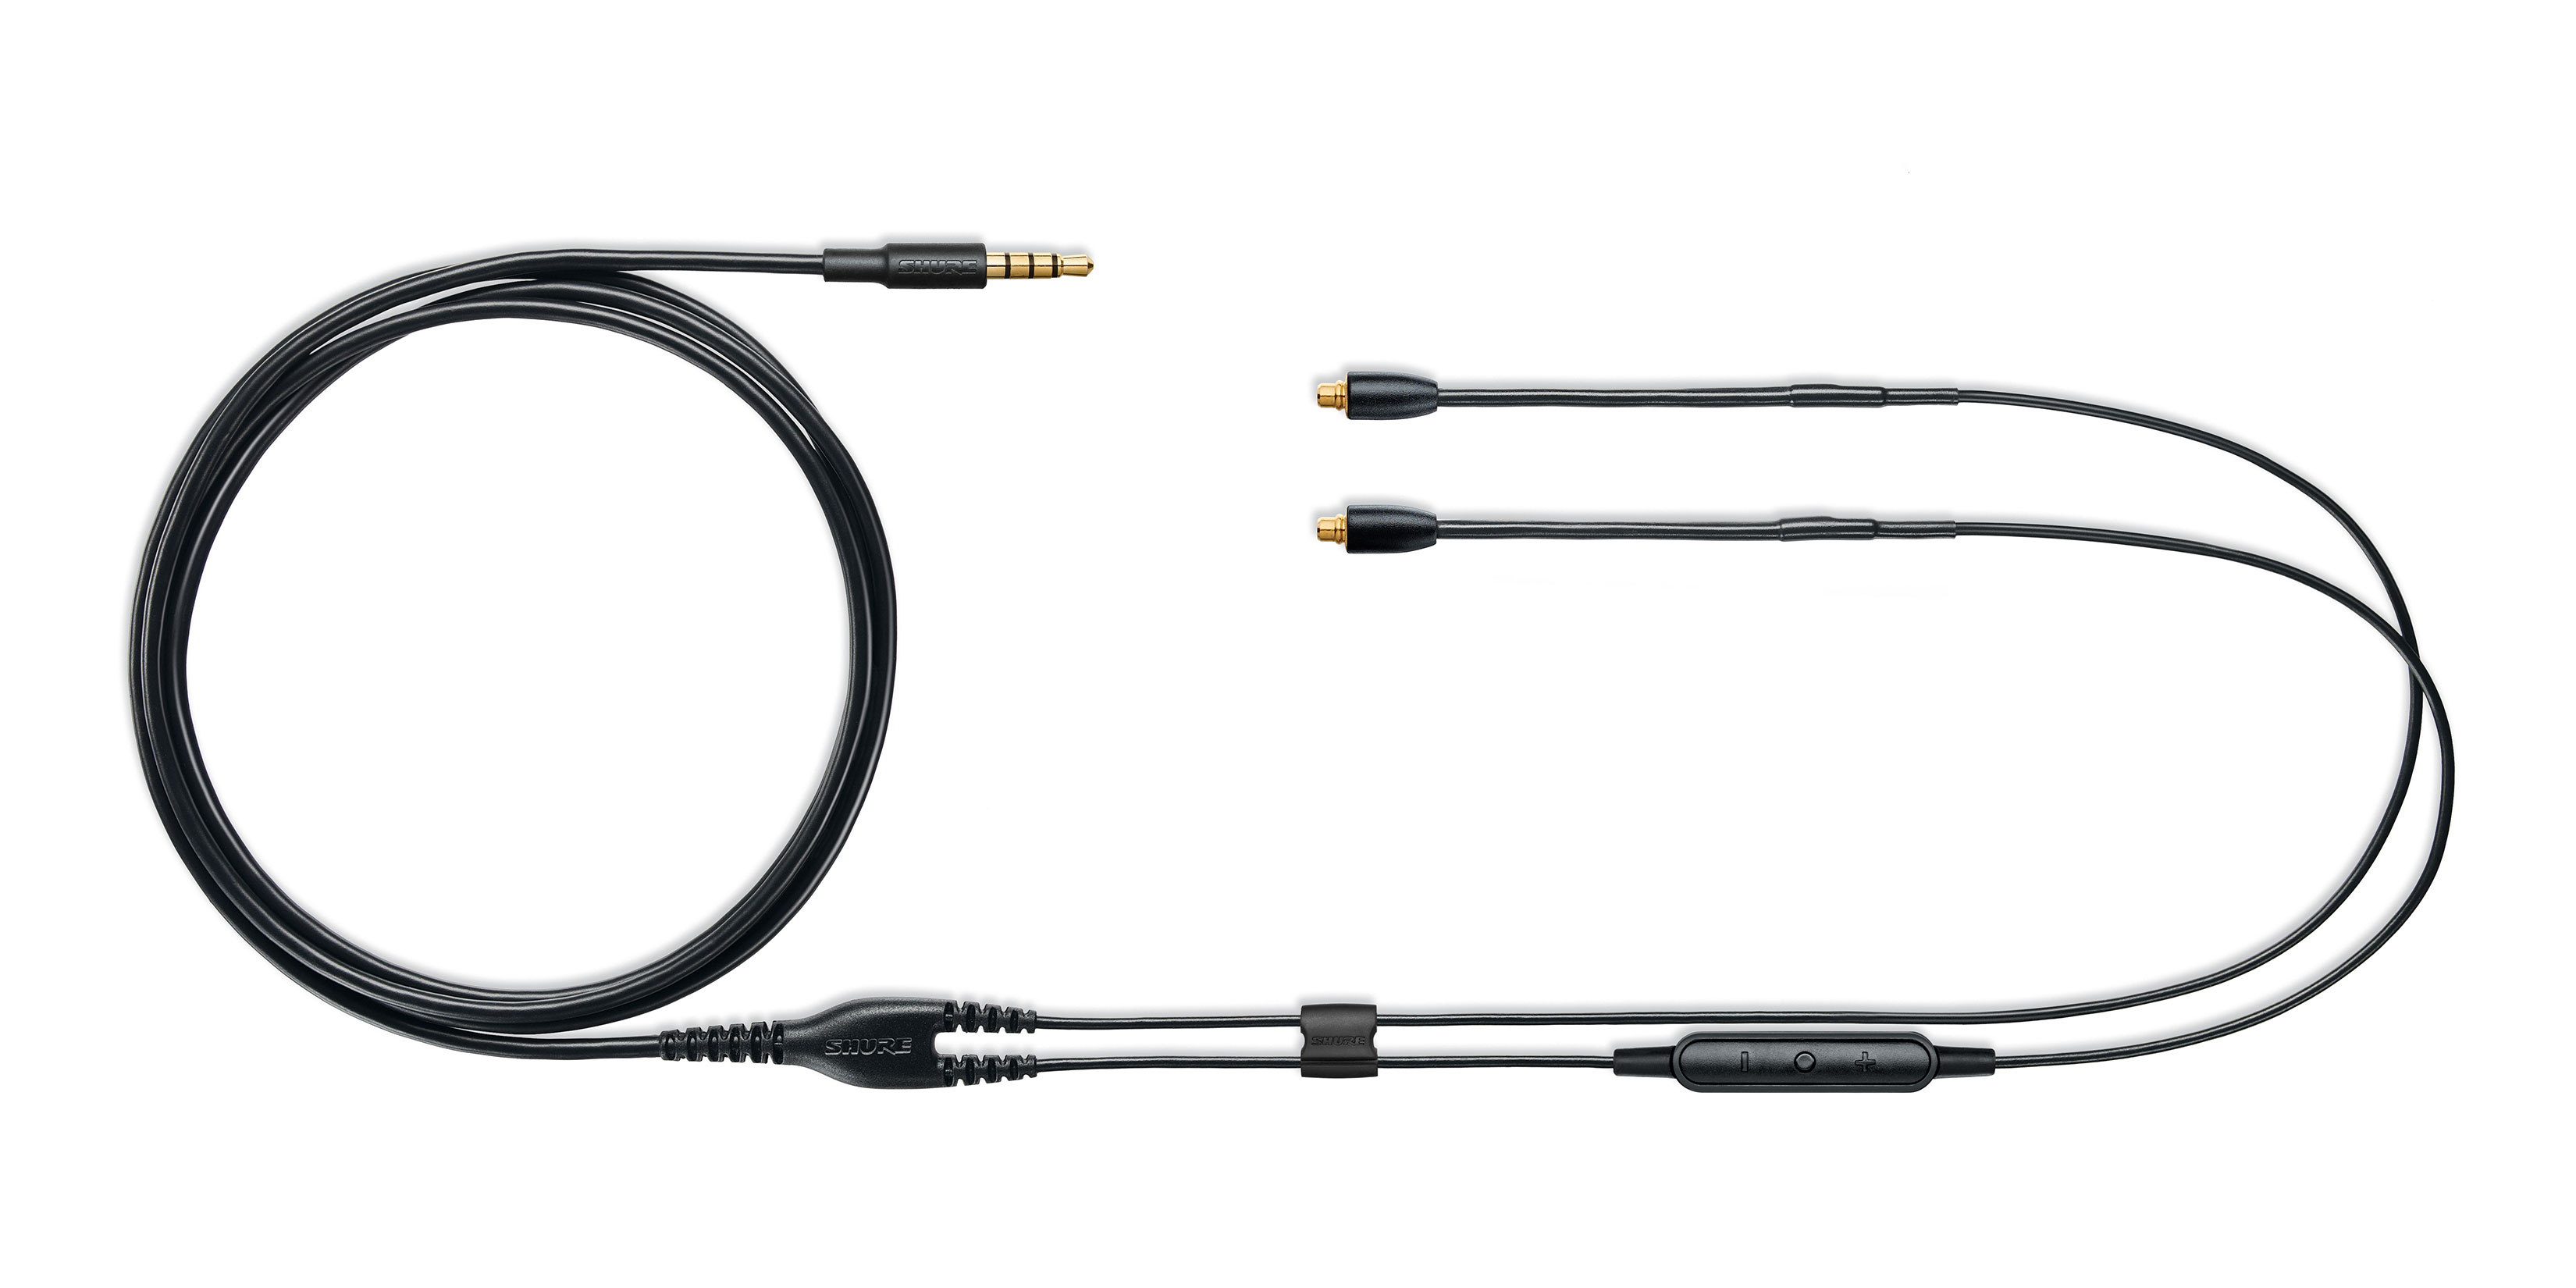 Photos - Other Sound & Hi-Fi Shure RMCE-UNI SE Earphone Accessory Cable with Mic and Remote 